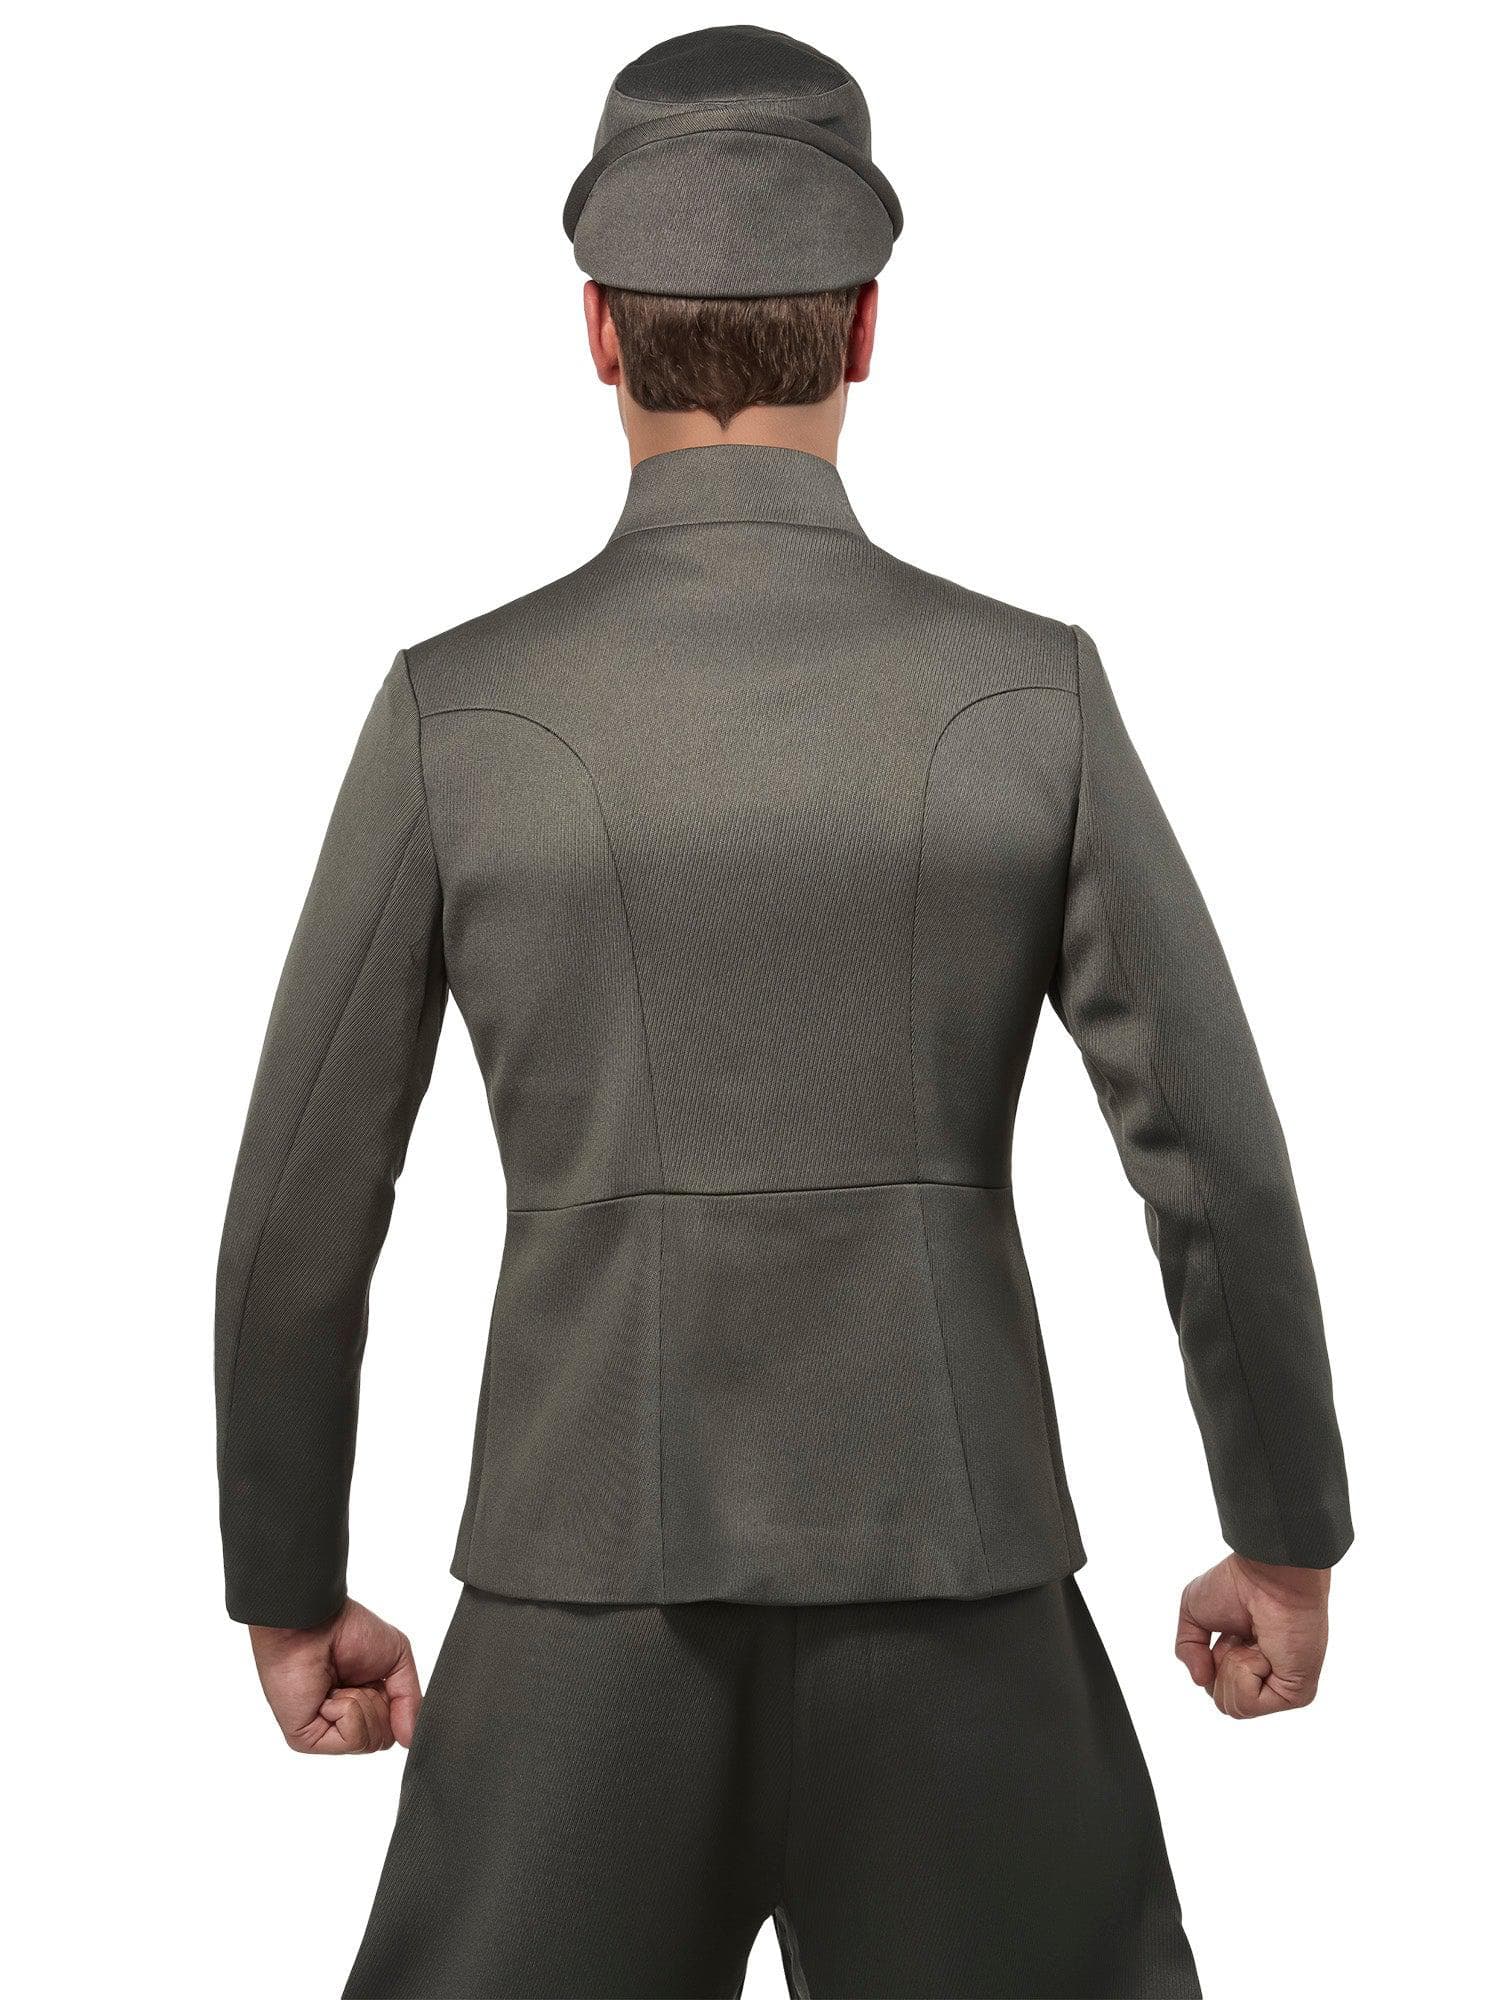 Denuo Novo - Star Wars: Imperial Officer Olive/Gray Tunic Costume Accessory - costumes.com